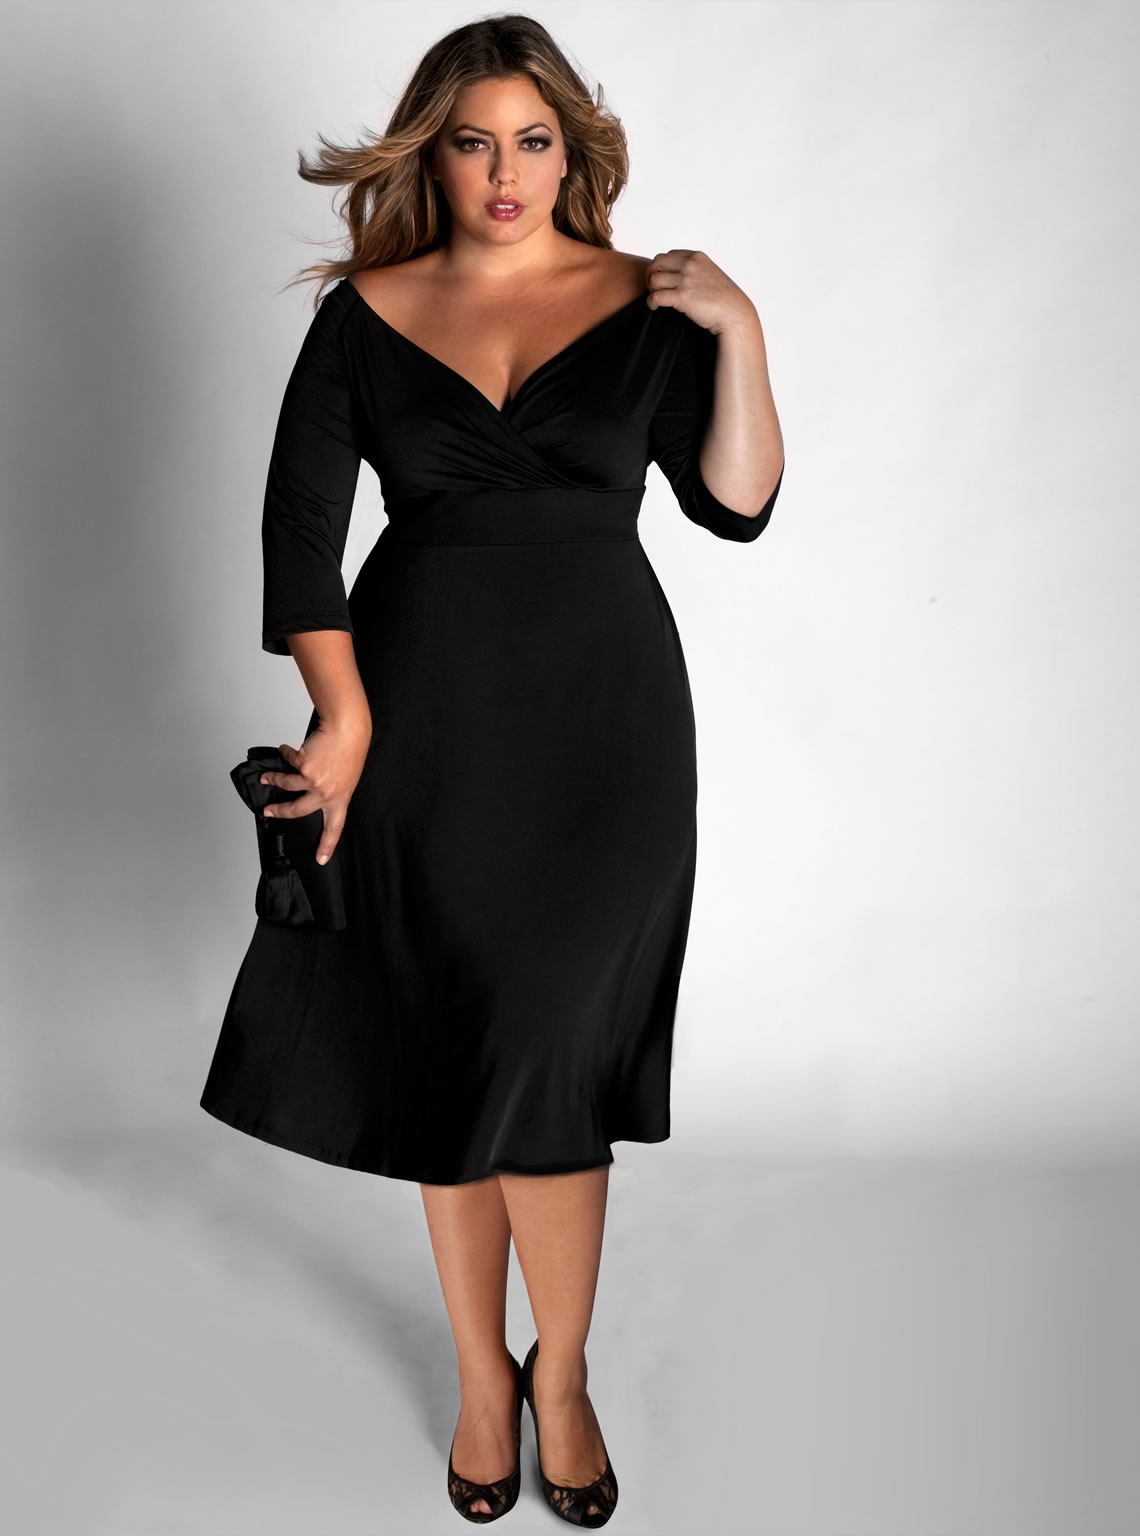 Dresses That Make Your Stomach Look Flat - Slimming Dresses